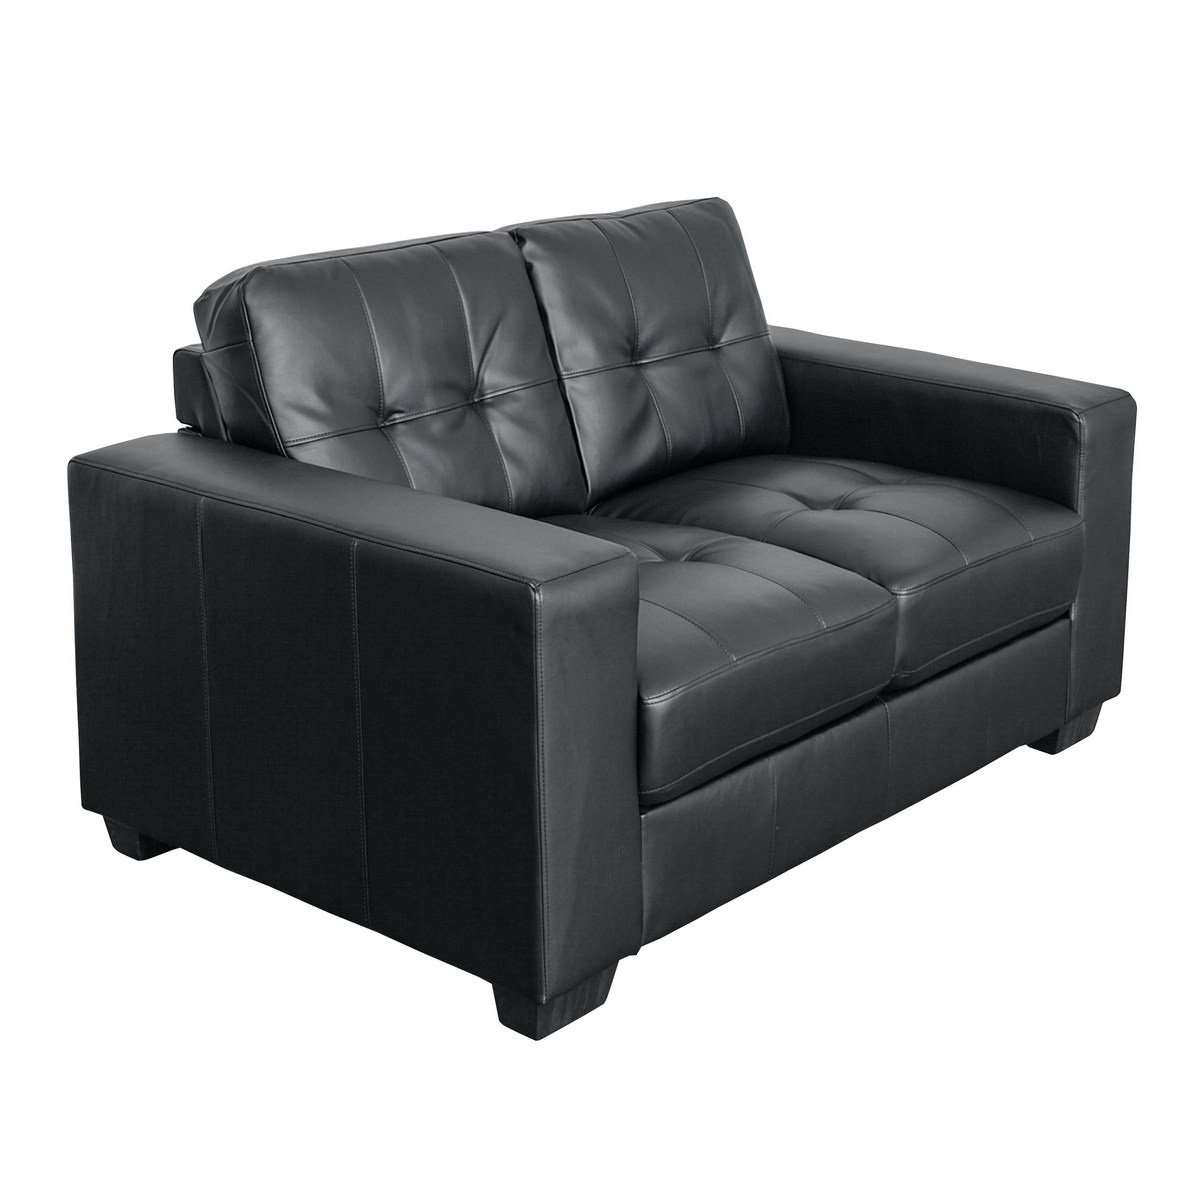 Corliving Lzy-101-l Club Tufted Black Bonded Leather Loveseat